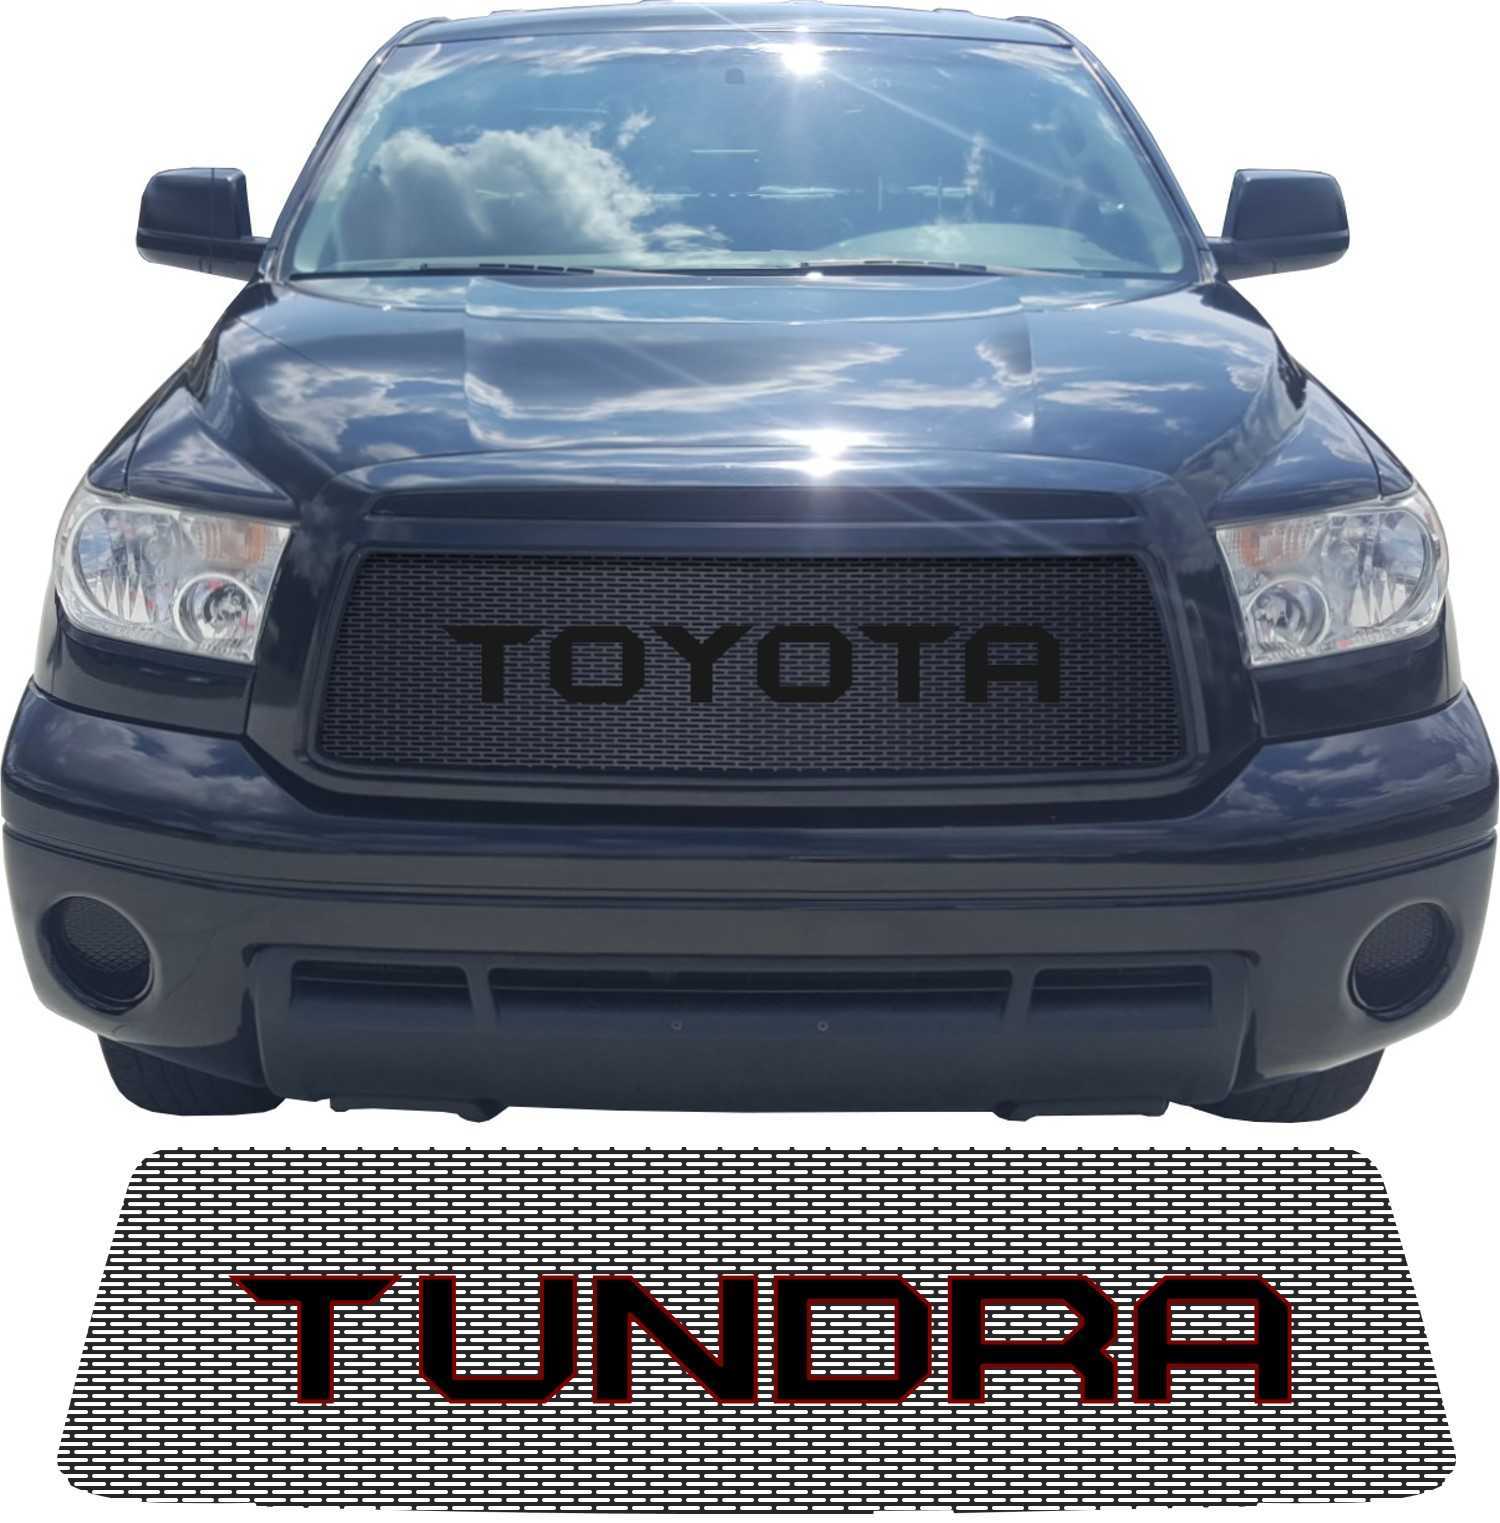 2010 - 2013 Toyota Tundra Grill Mesh with Big Letters #1